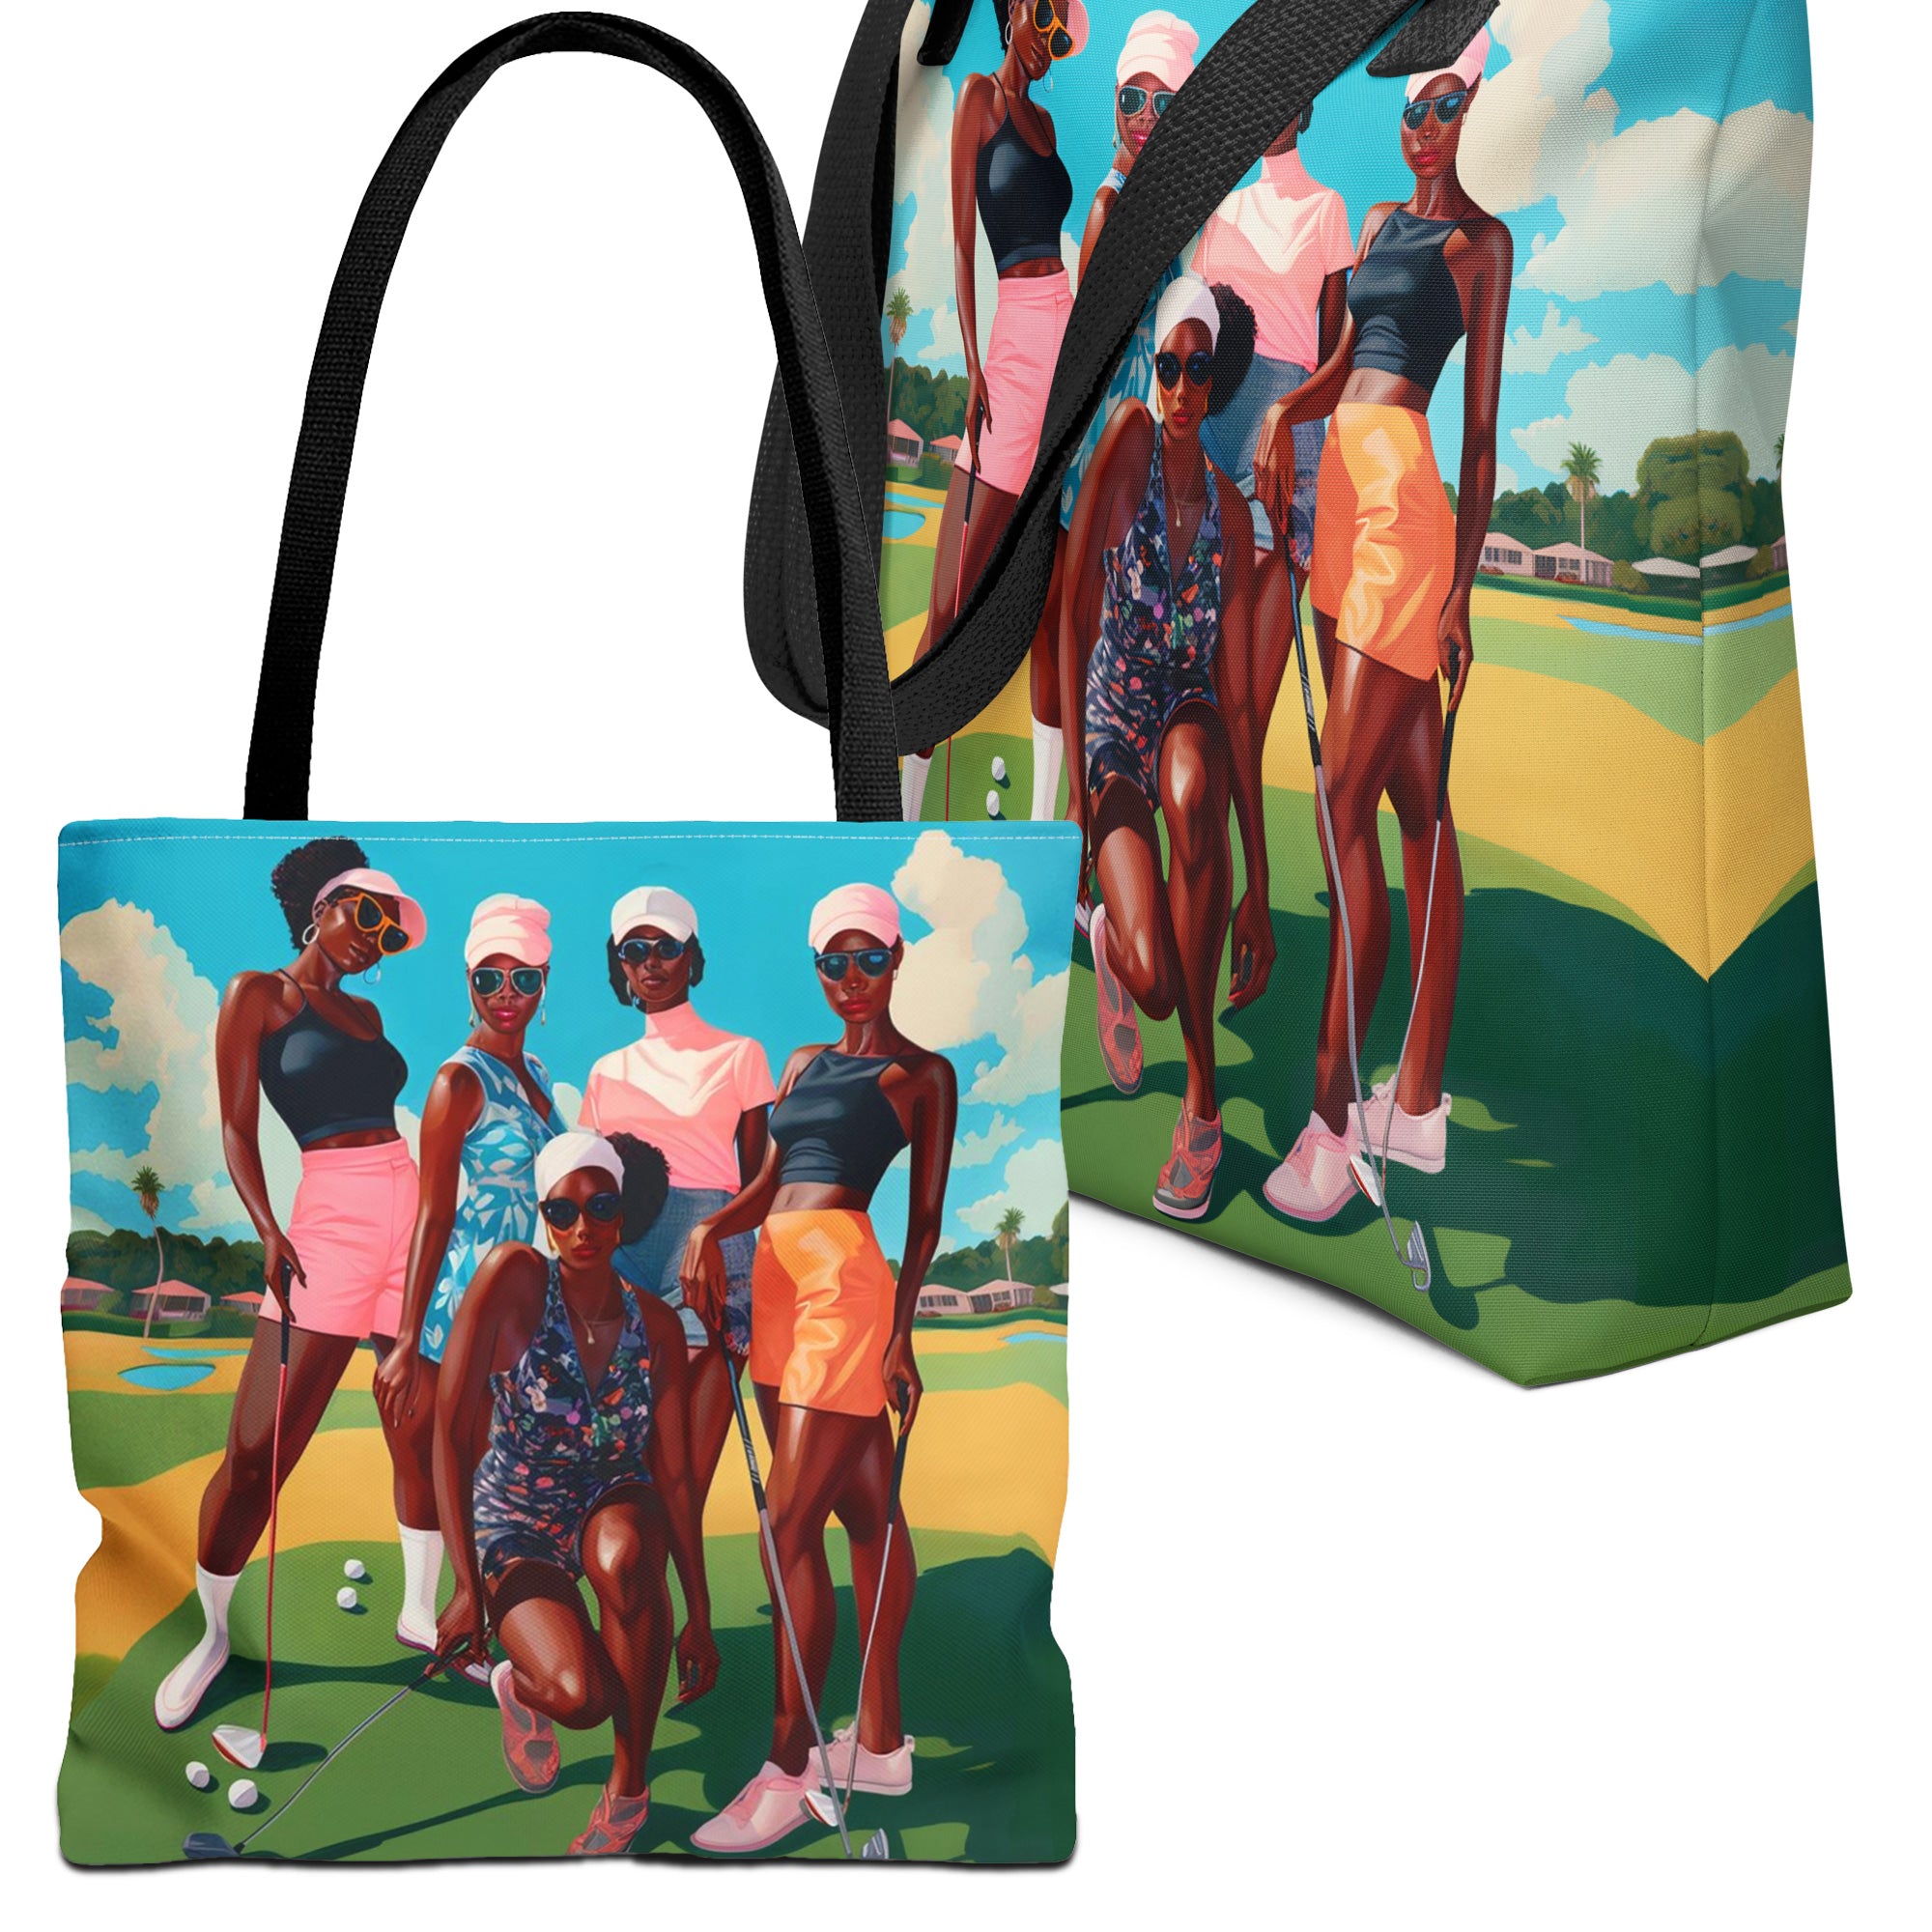 Black Women Golfers Tote Bag - front and side view.